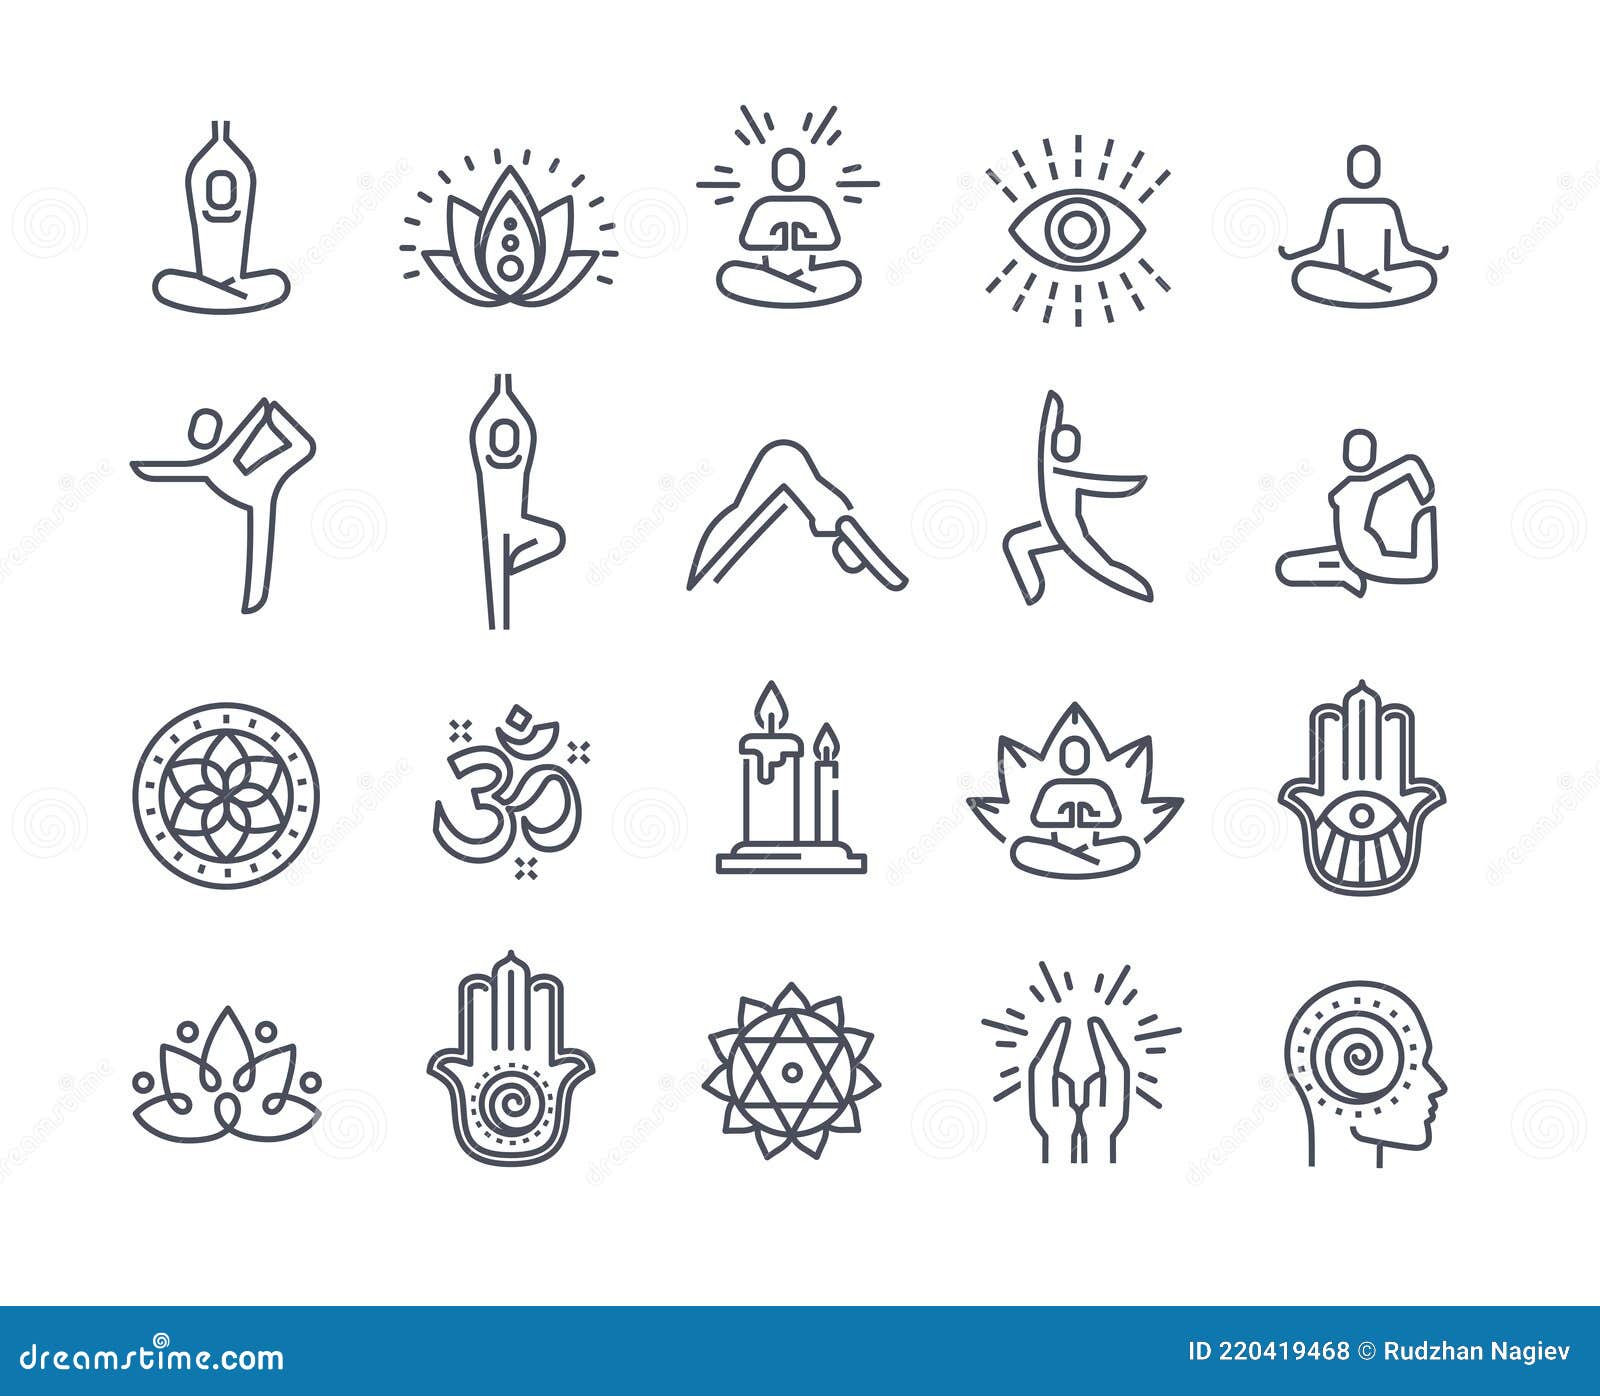 Yoga and Meditation Practice Vector Line Icons Stock Vector ...